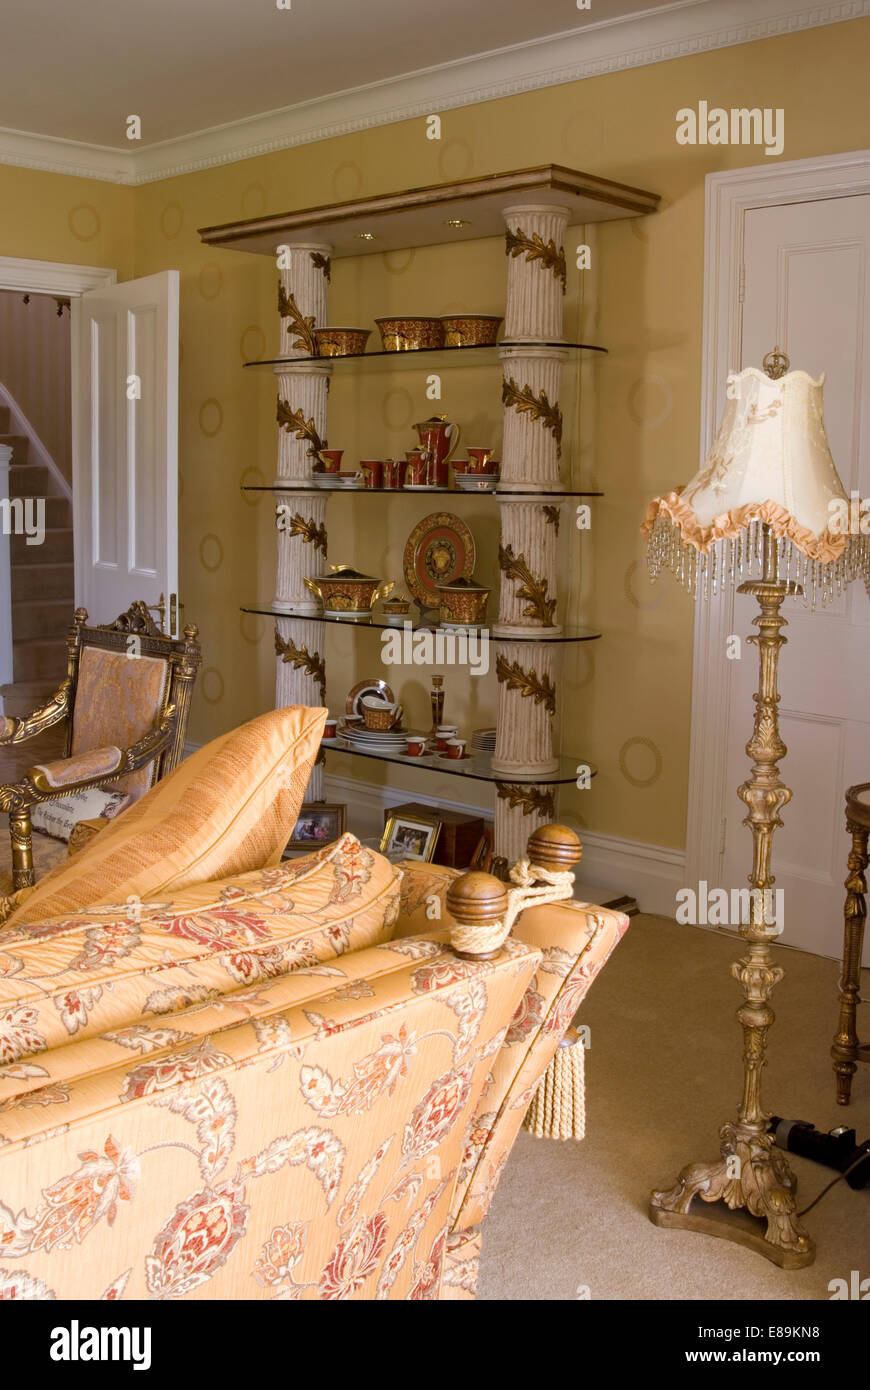 Gilt standard lamp and classical pillared shelves in living room with Knole sofa Stock Photo